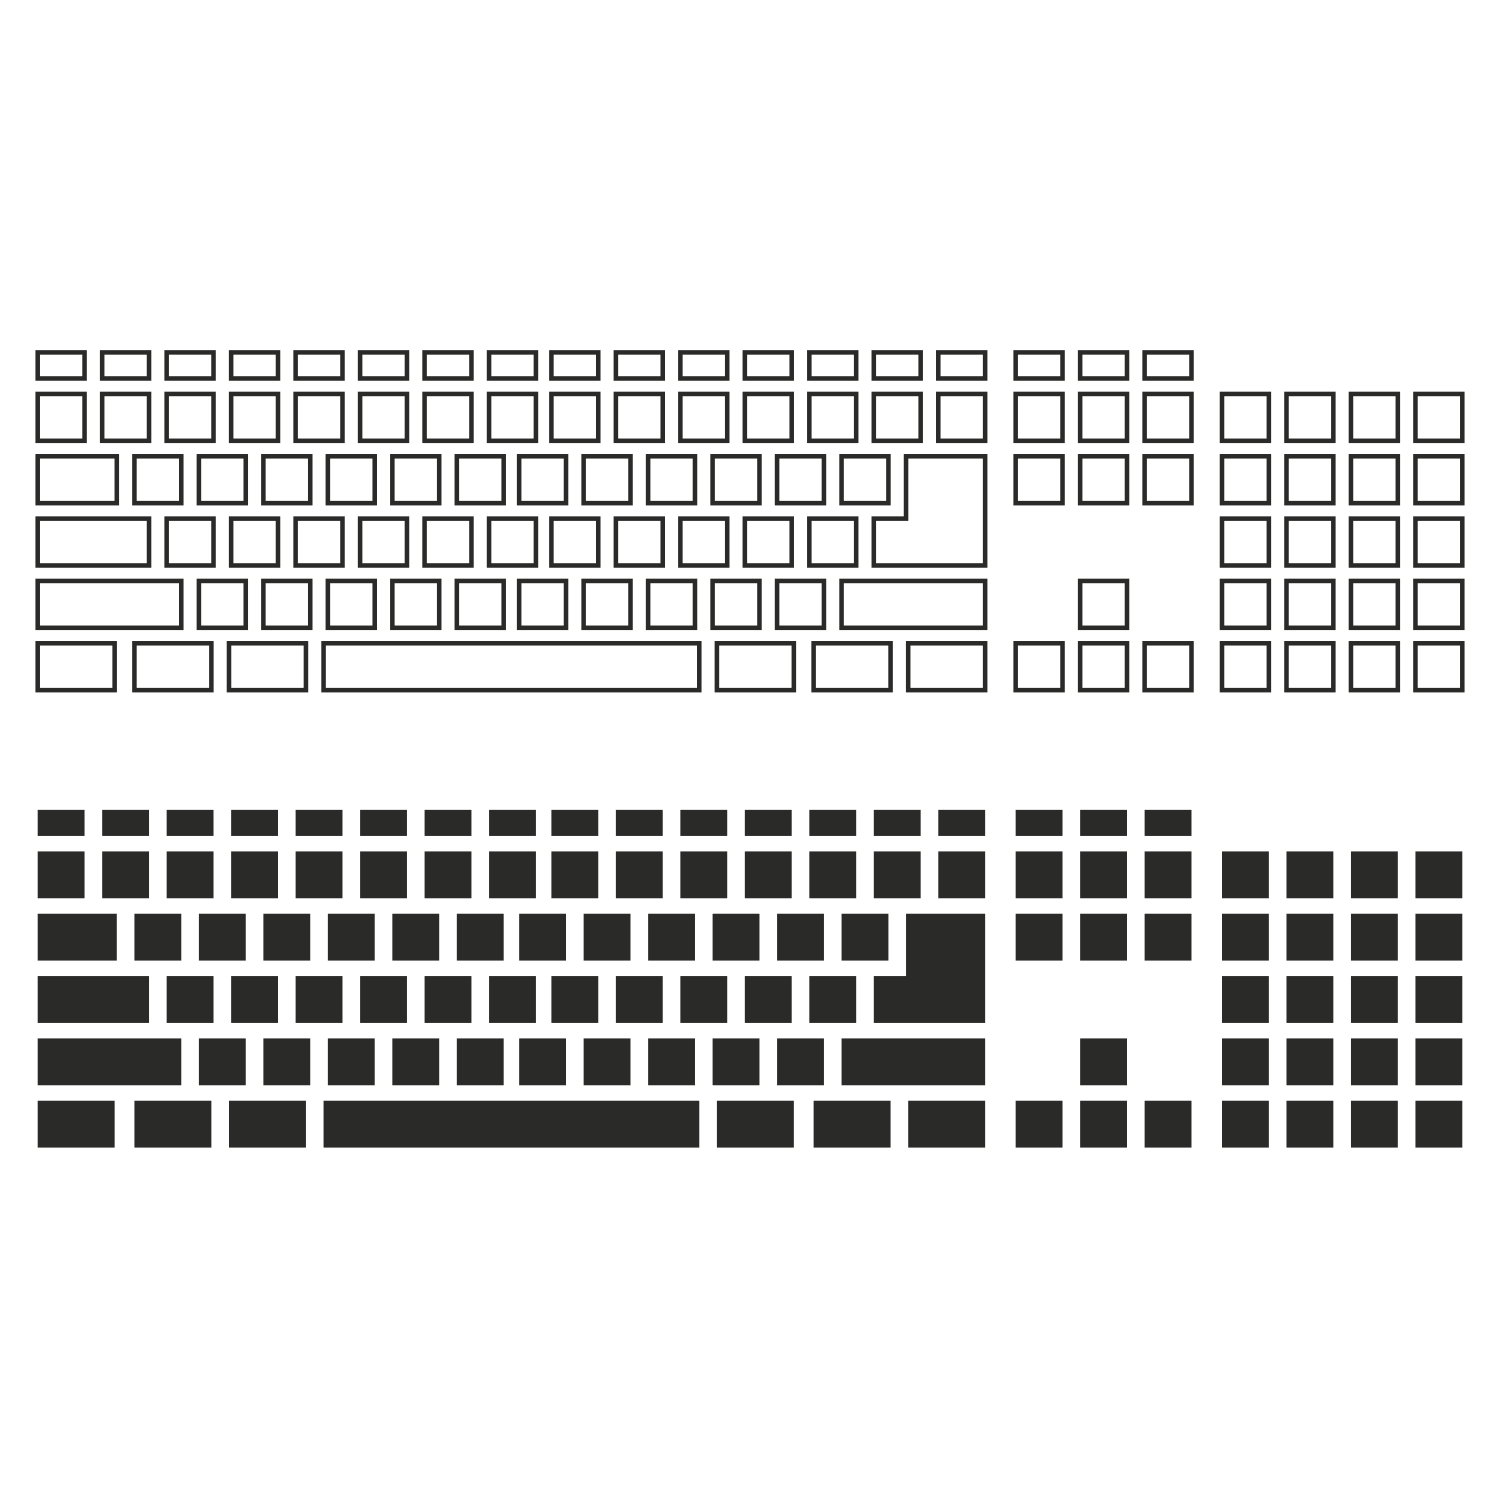 vector-for-free-use-keyboard-template